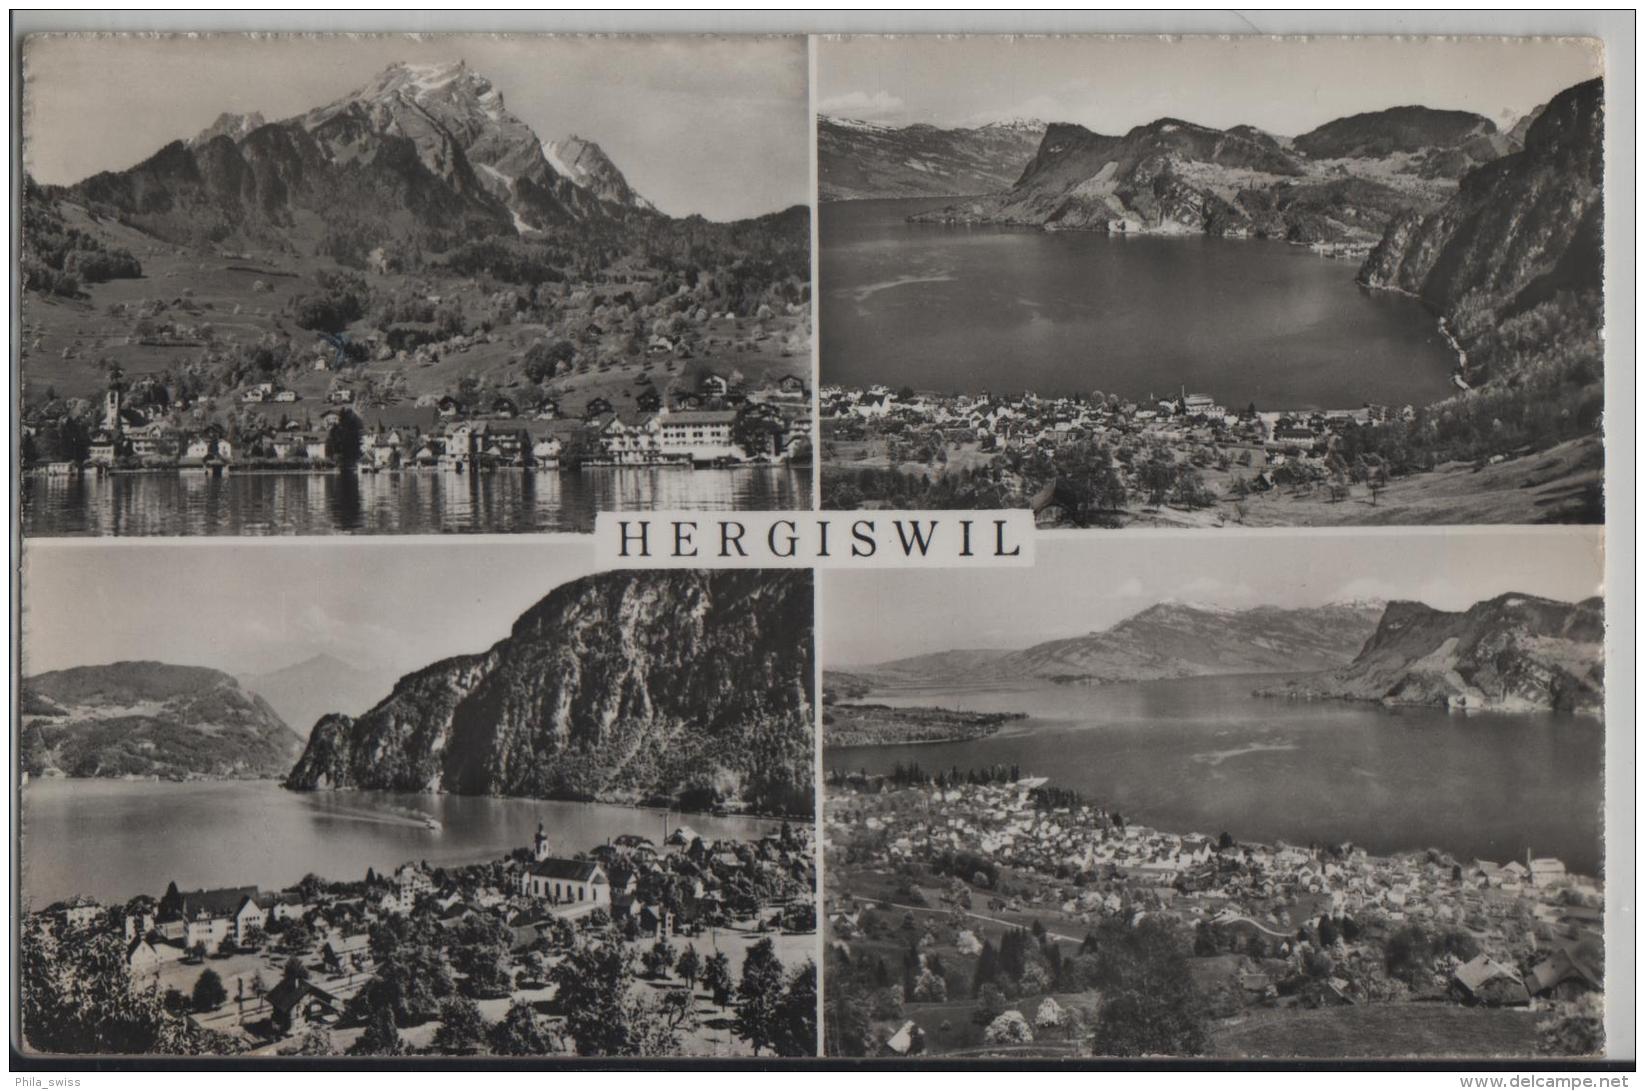 Hergiswil - Multiview - Photo: Globetrotter No. 0955 - Hergiswil